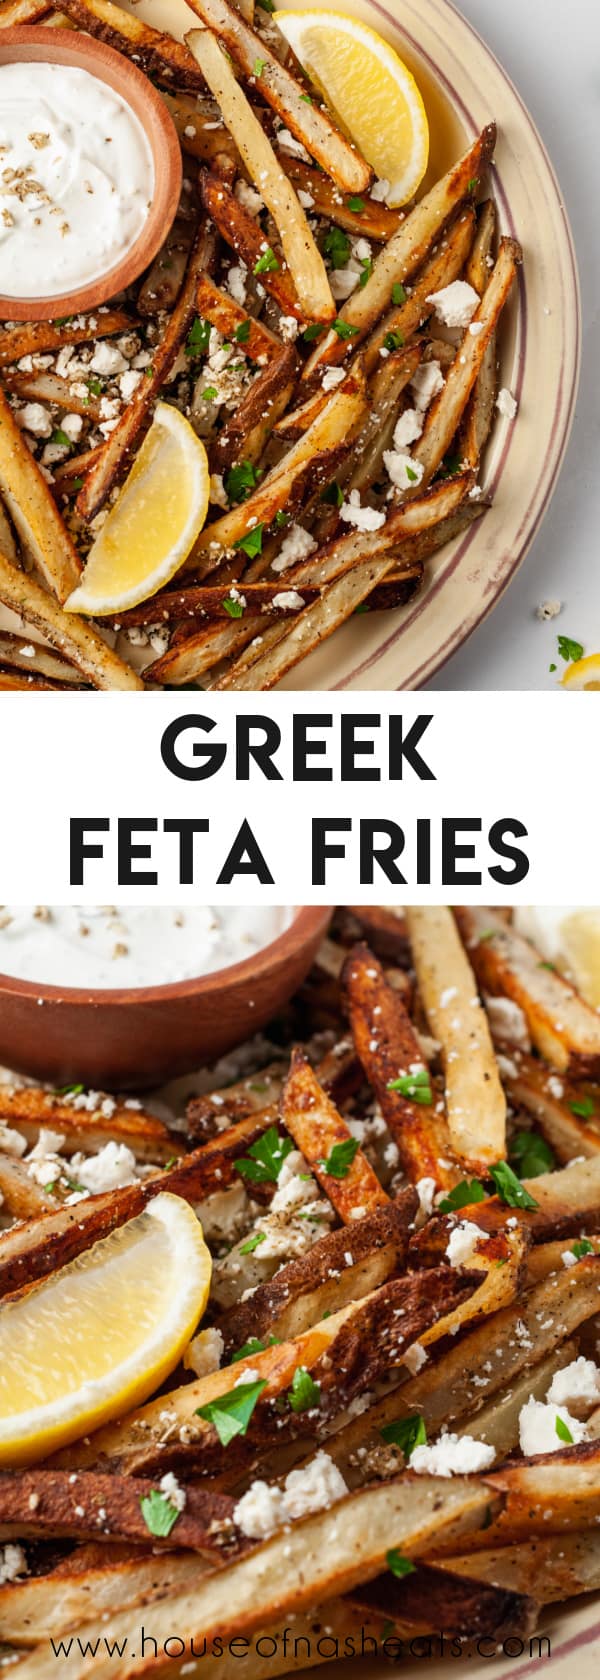 A collage of images of Greek fries with text overlay.